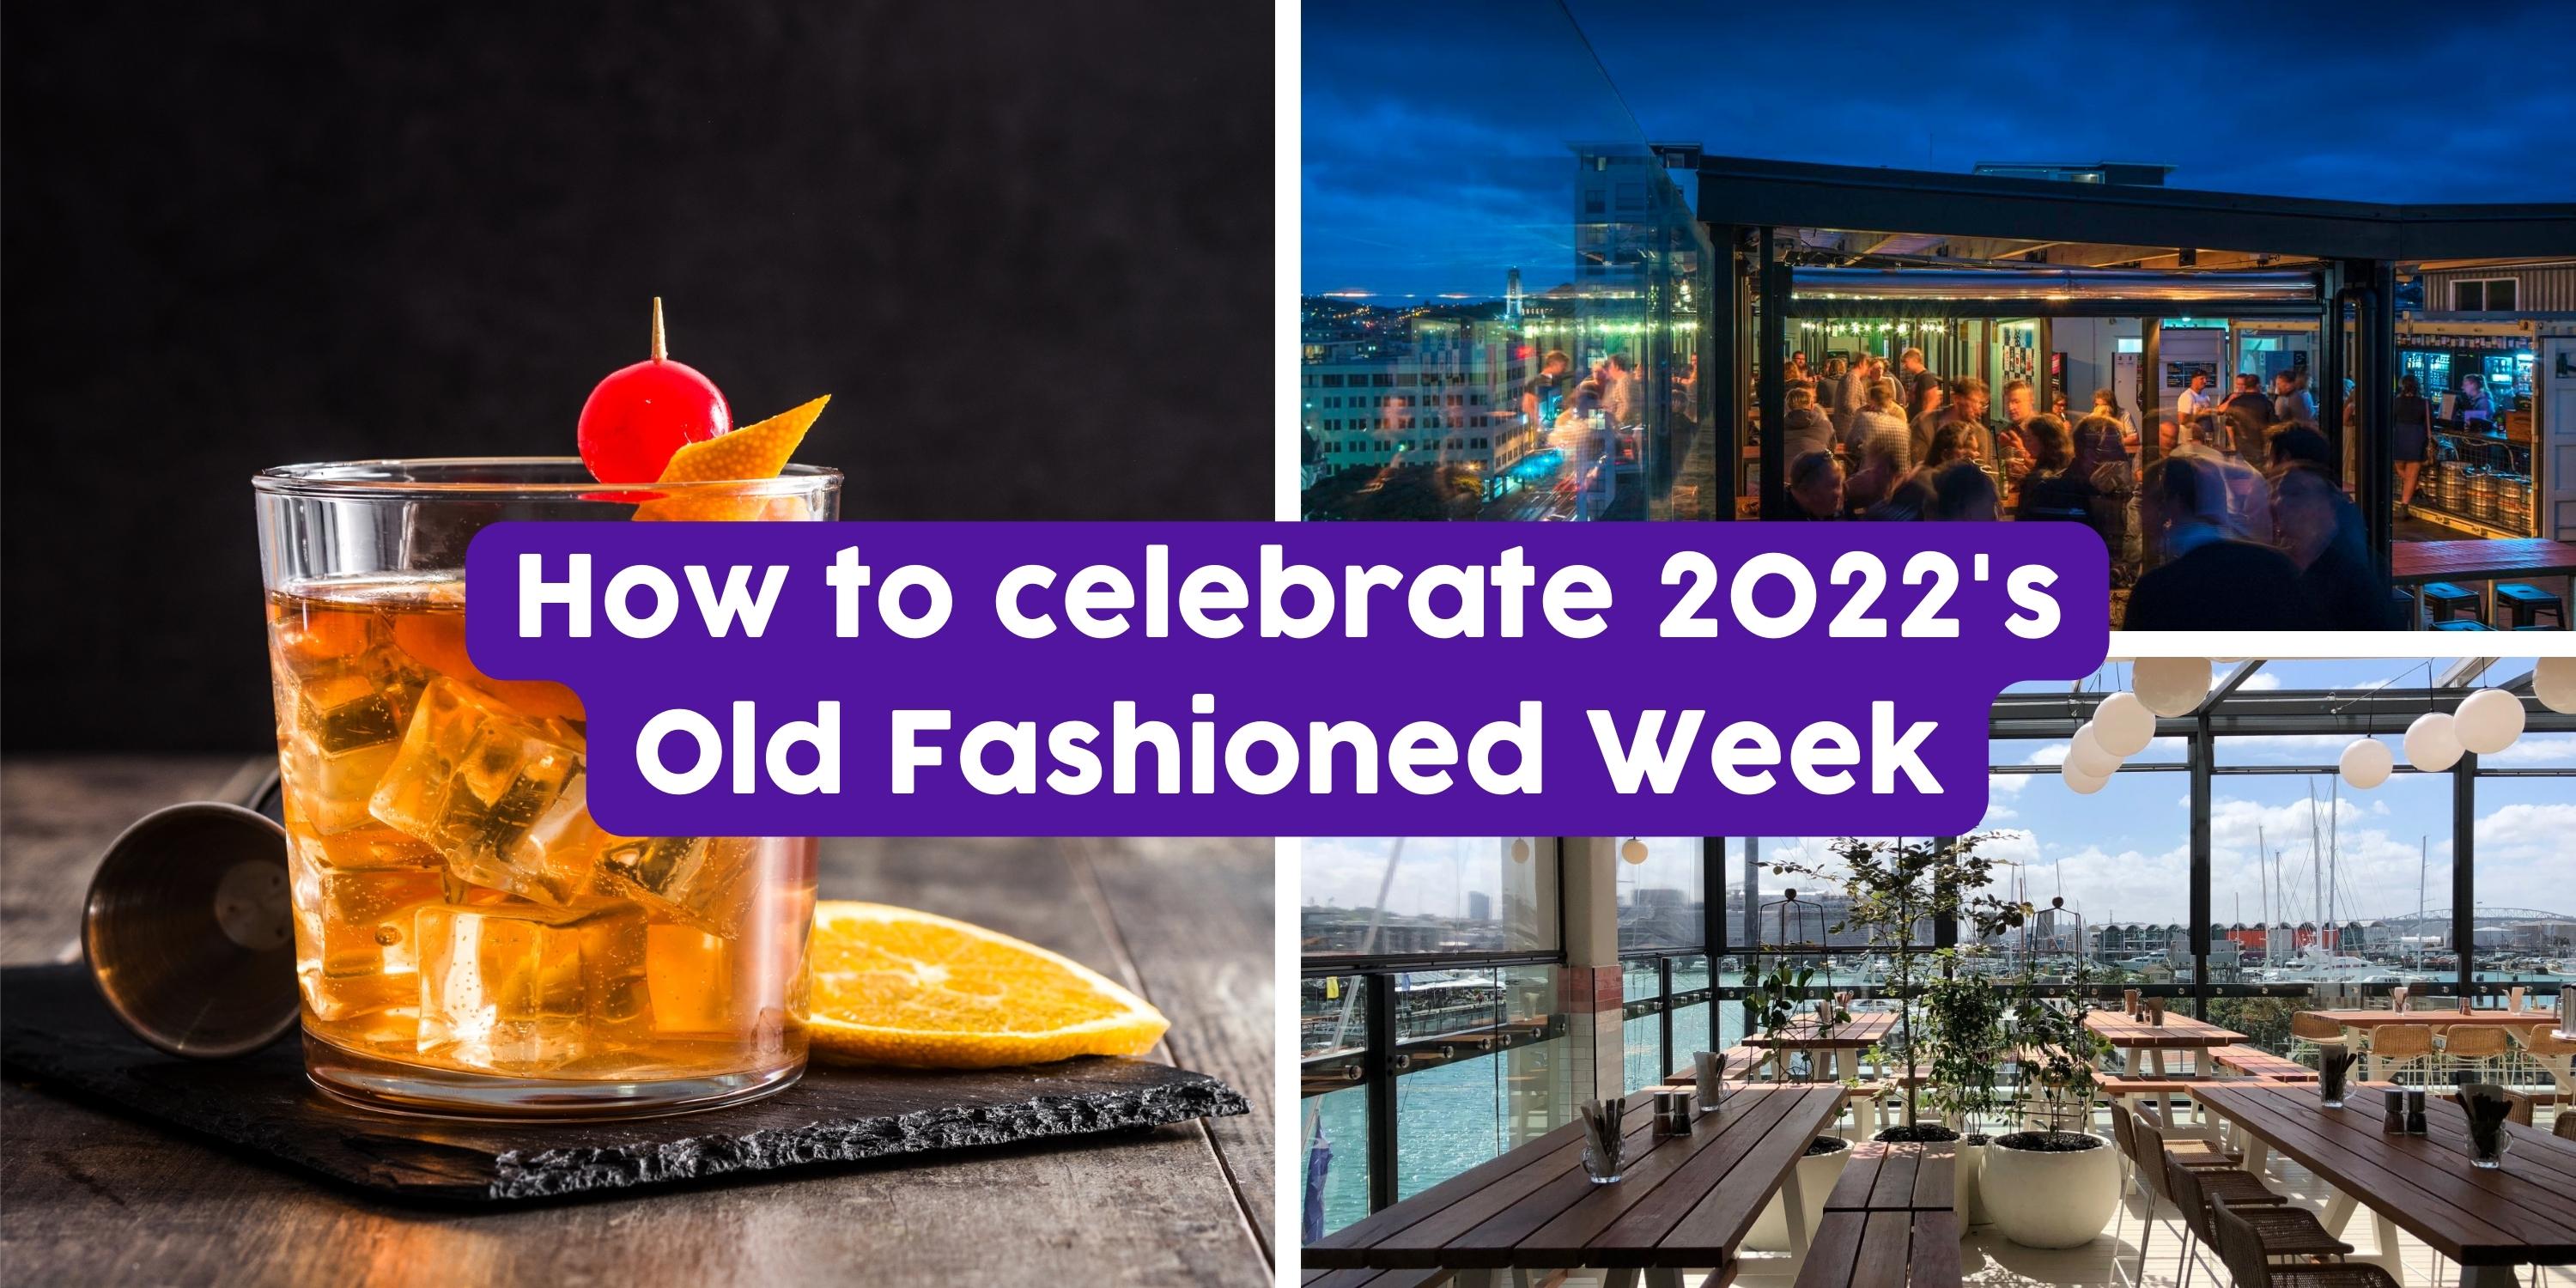 How to Celebrate Old Fashioned Week in 2022 Barcats